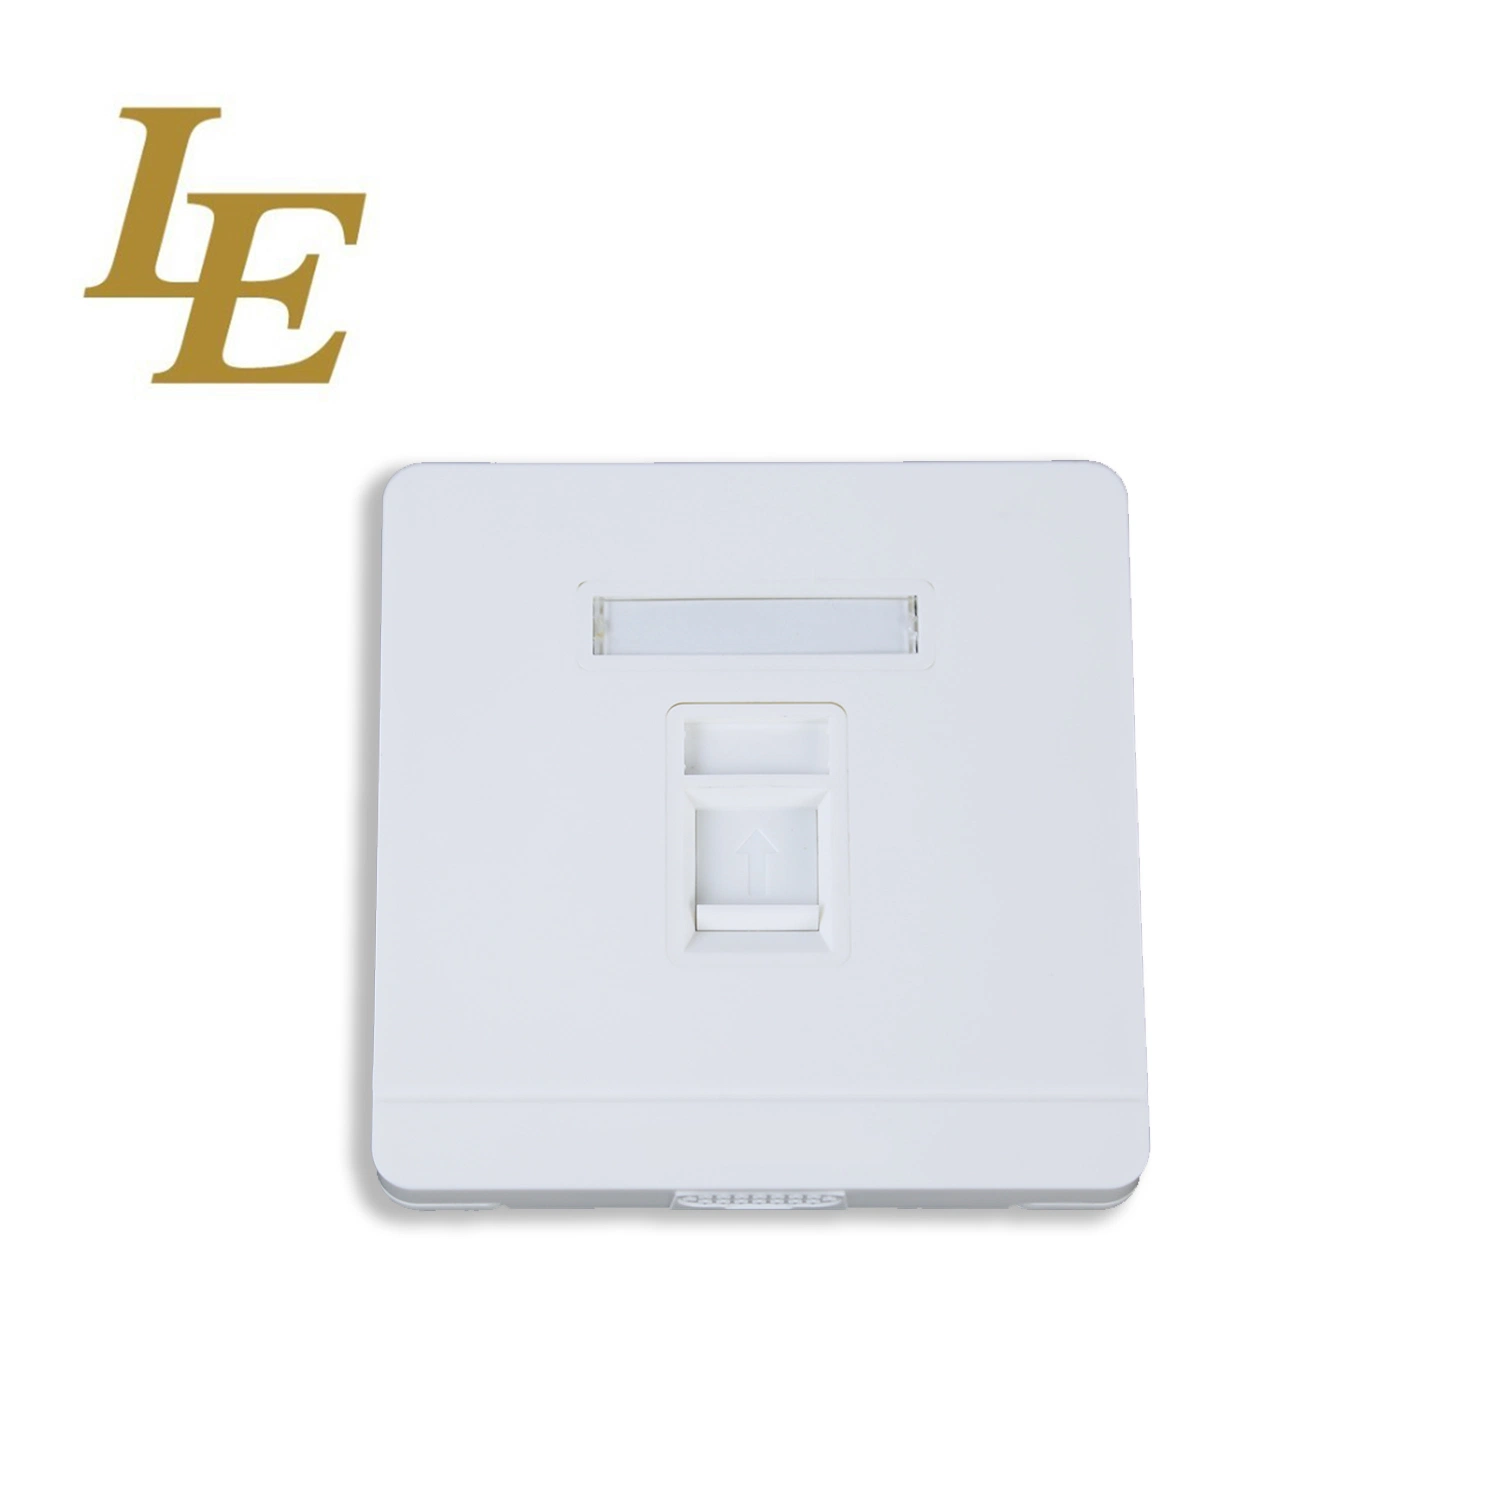 Le F02X 1 2 Port 86 RJ45 Ethernet Wall Faceplate